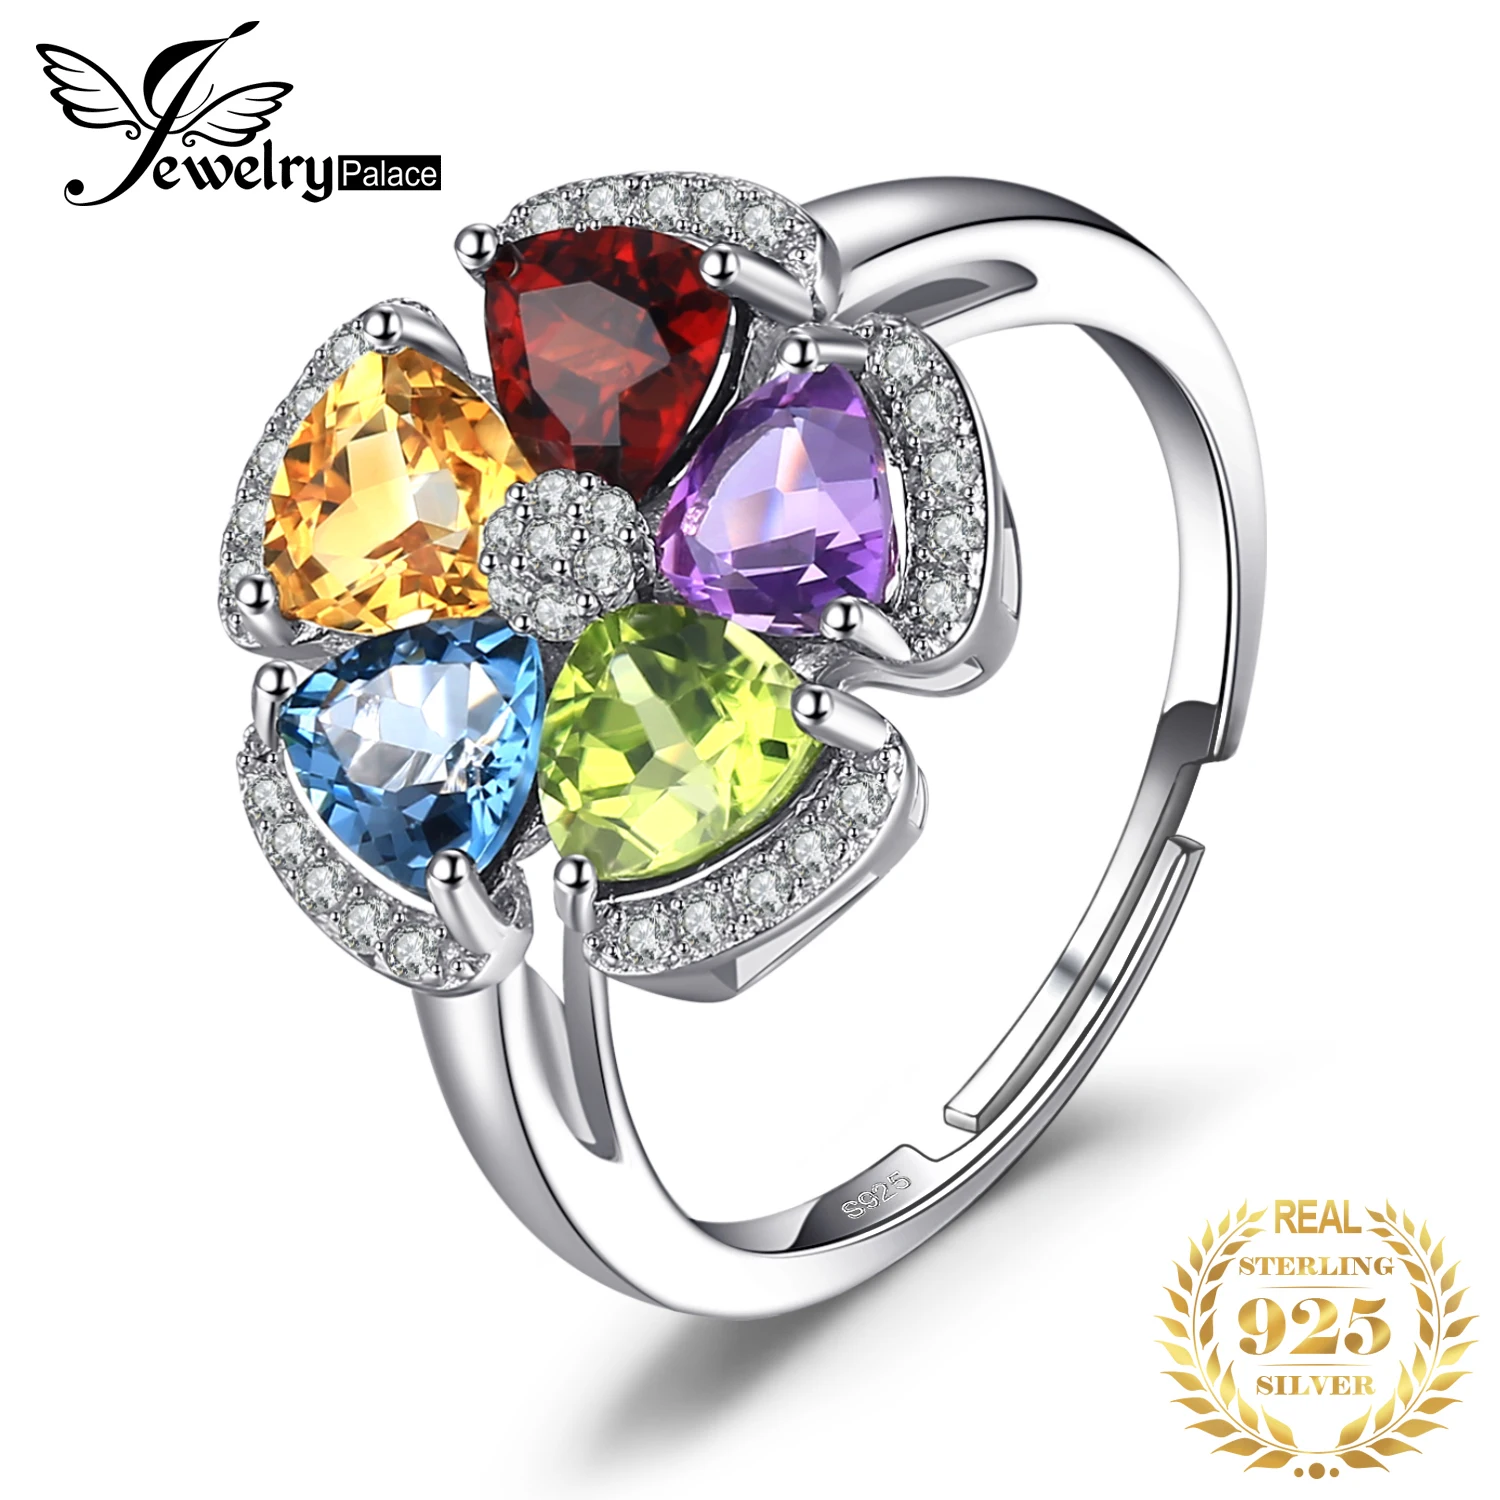 

JewelryPalace 2.6ct Genuine Swiss Blue Topaz Amethyst Citrine Garnet Peridot Open Adjustable Promise Ring 925 Sterling Silver